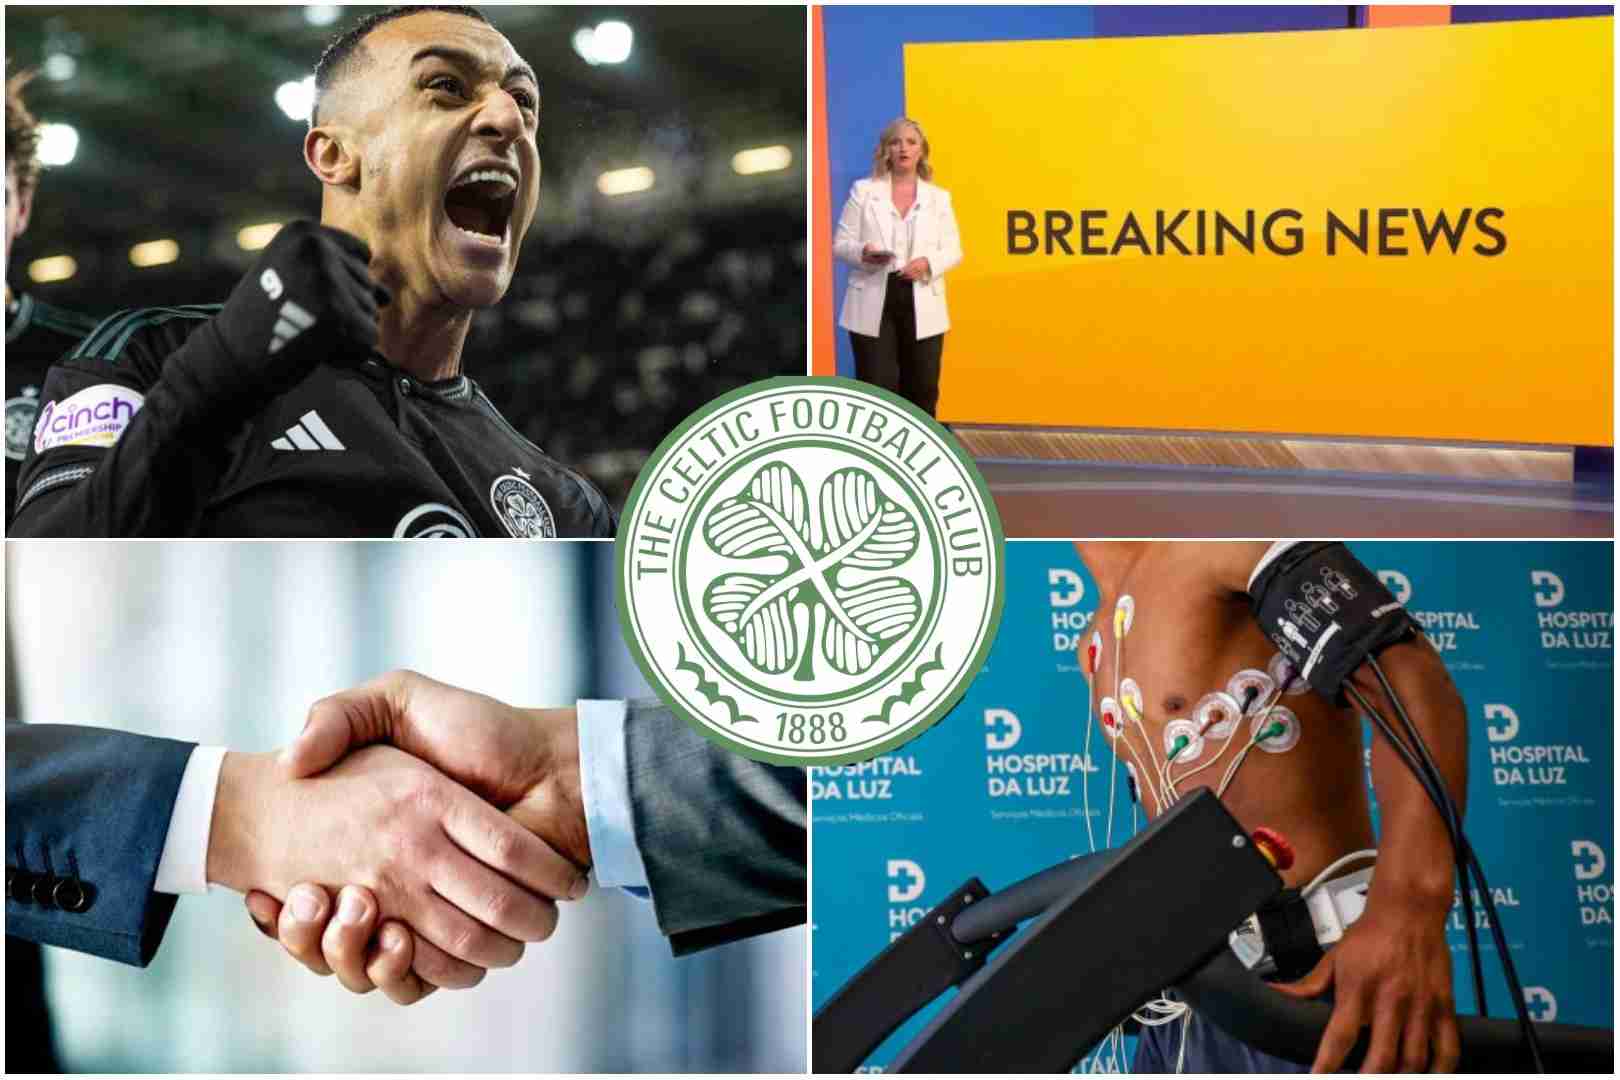 Done Deal, Here We Go – He will be Announced as New Signing Today after Celtic completes Summer Transfer Deal for Excellent star amid Adam Idah to Parkhead breakthrough